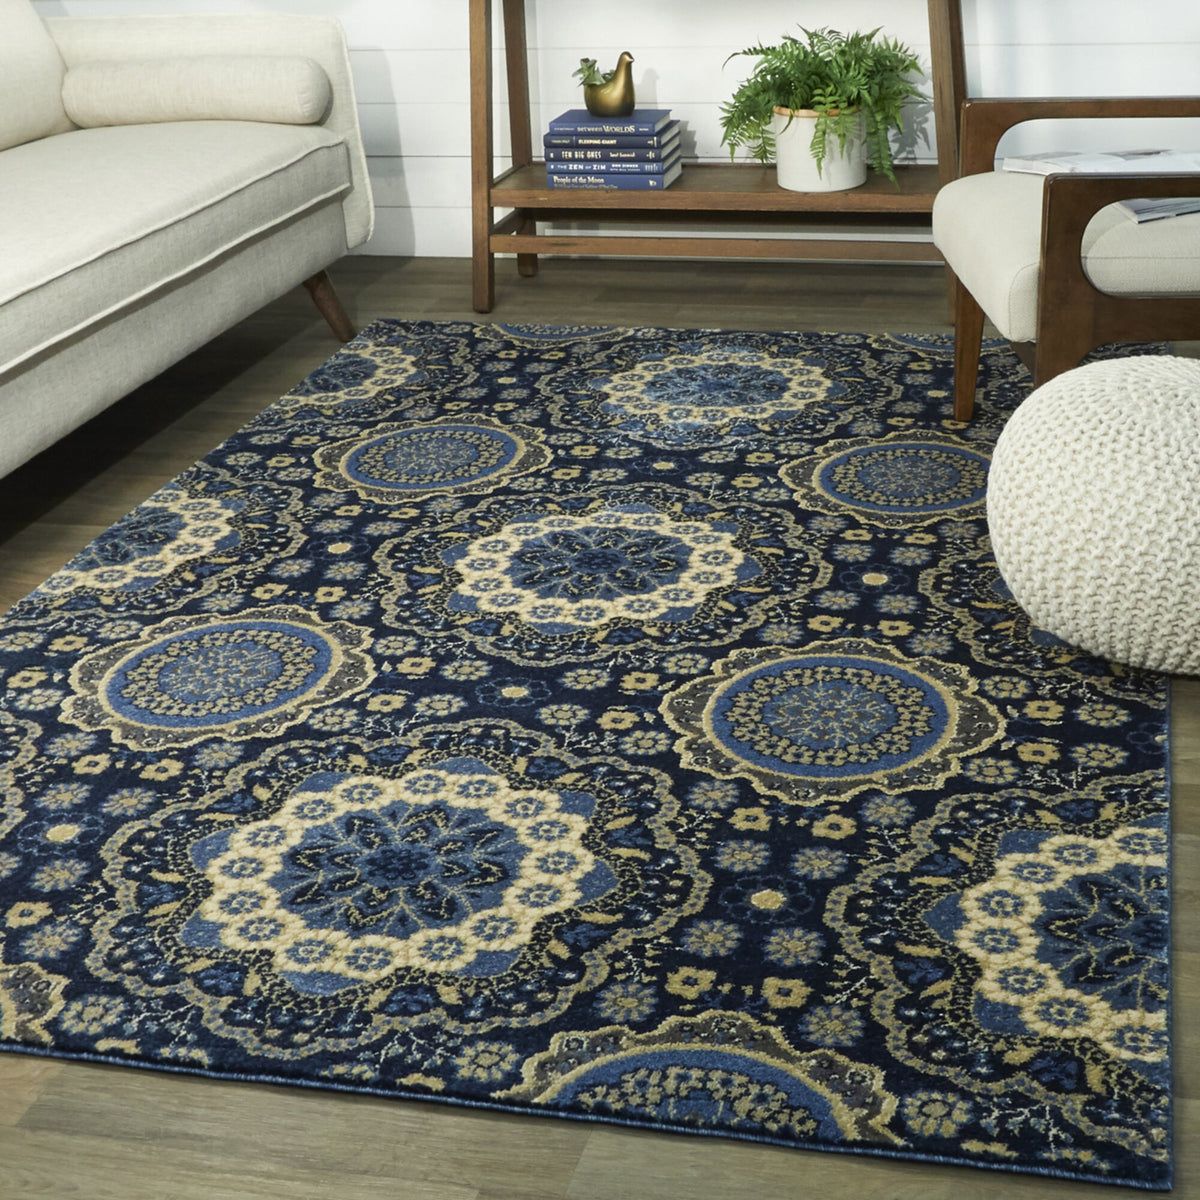 Russell Floral Medallion Area Rug